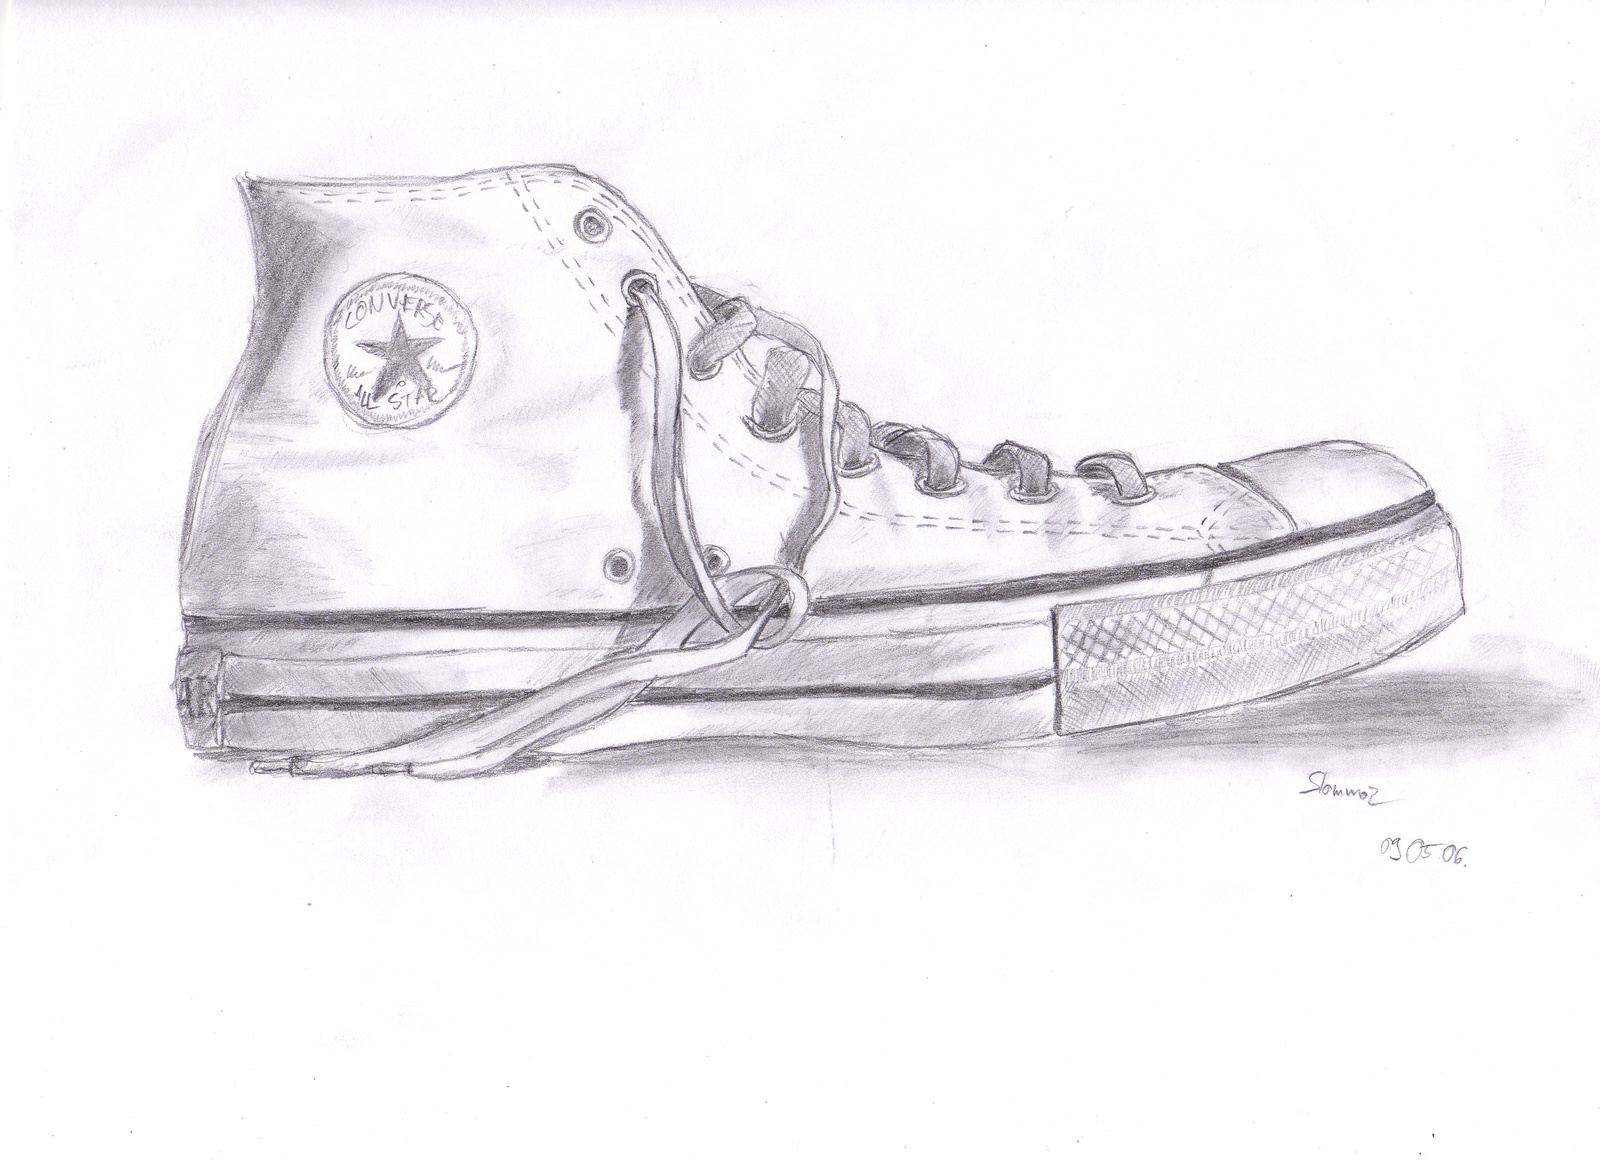 Converse#2 - From a photo